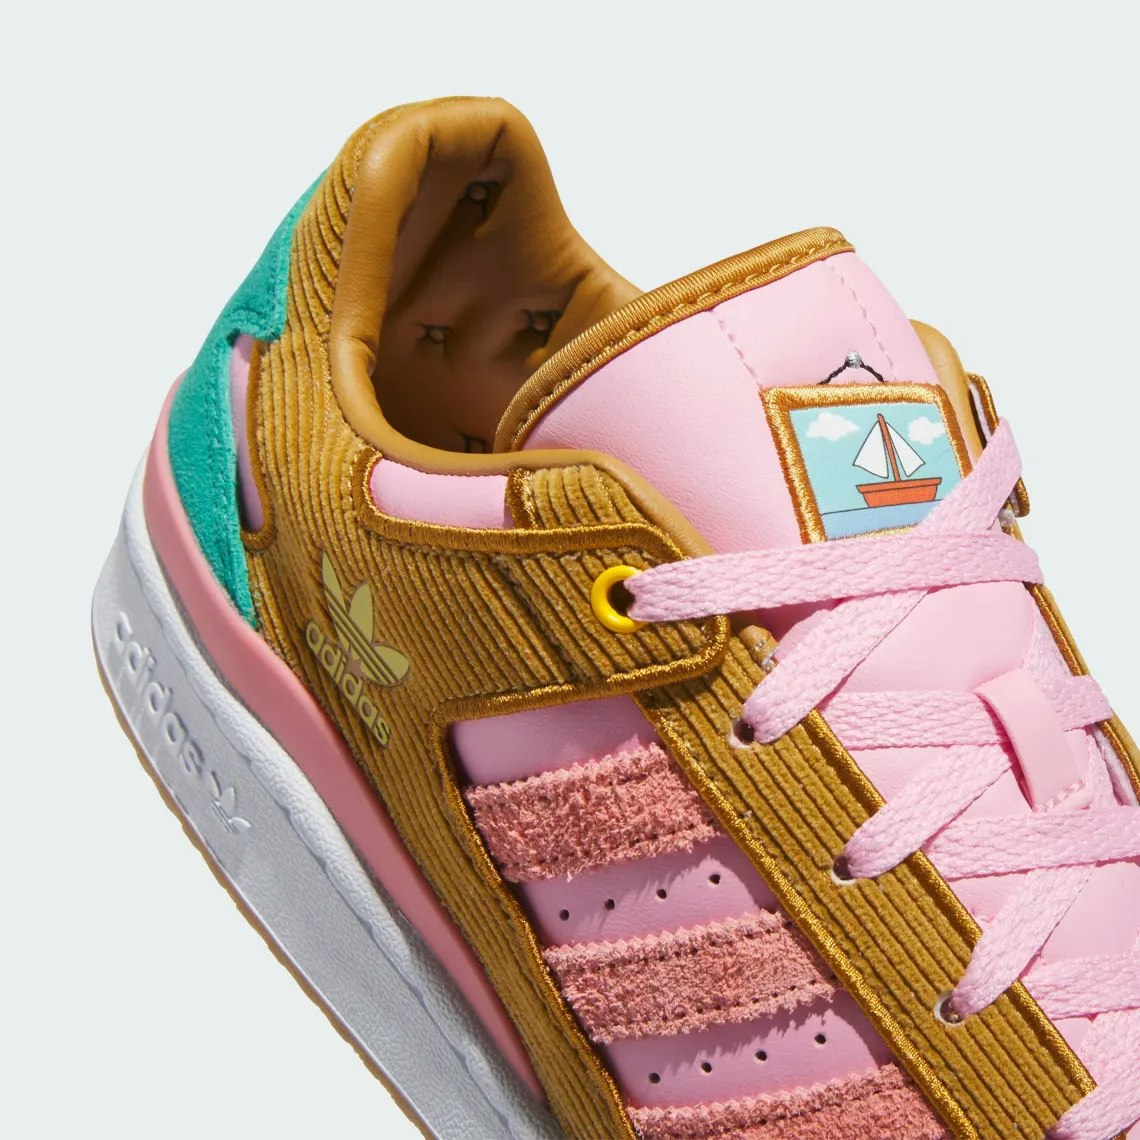 The Simpsons x adidas Forum Low "Living Room"